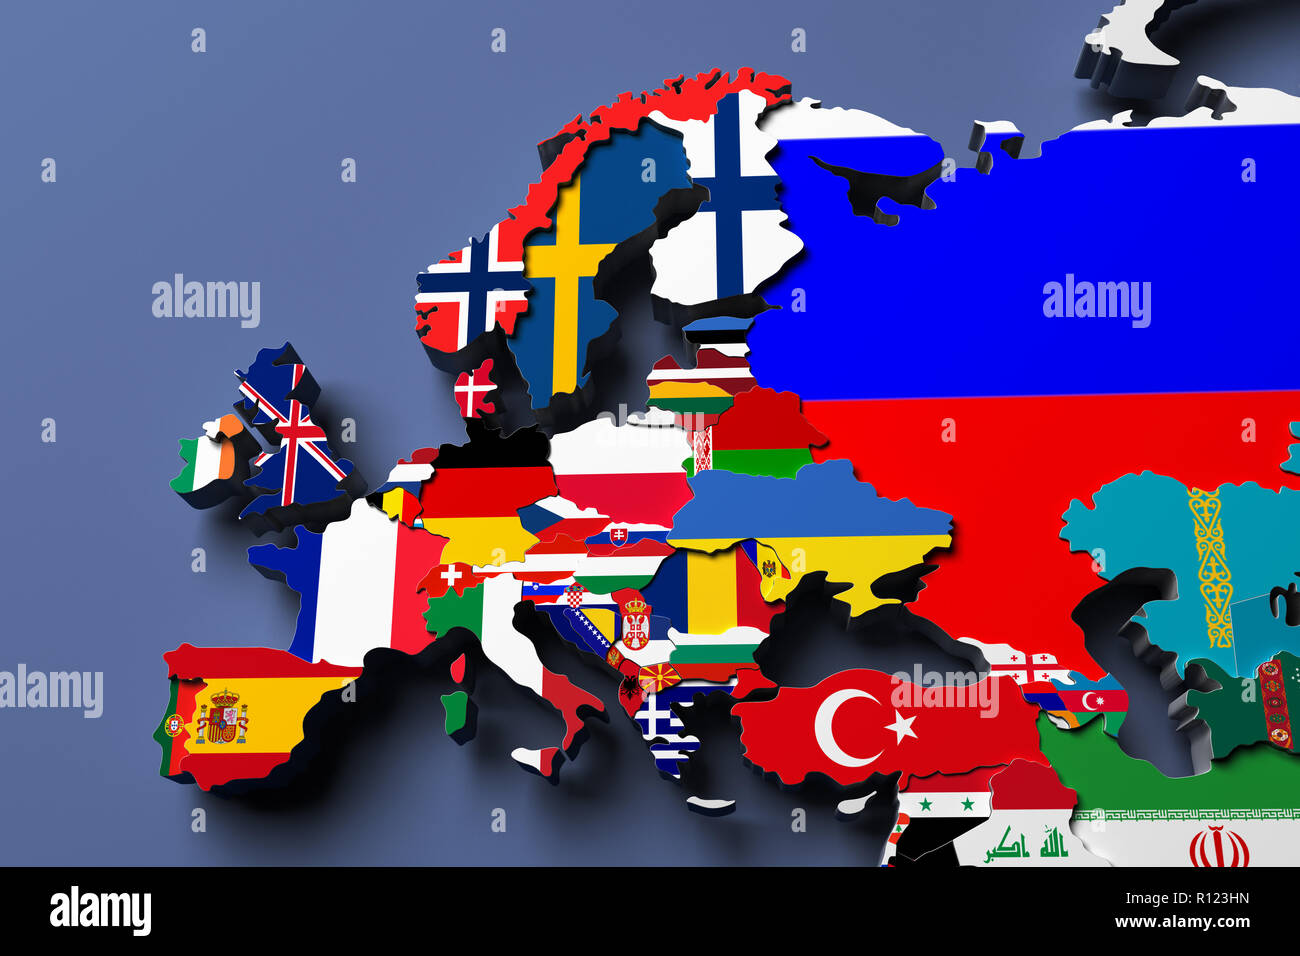 Europe  political map 3d rendered image Stock Photo